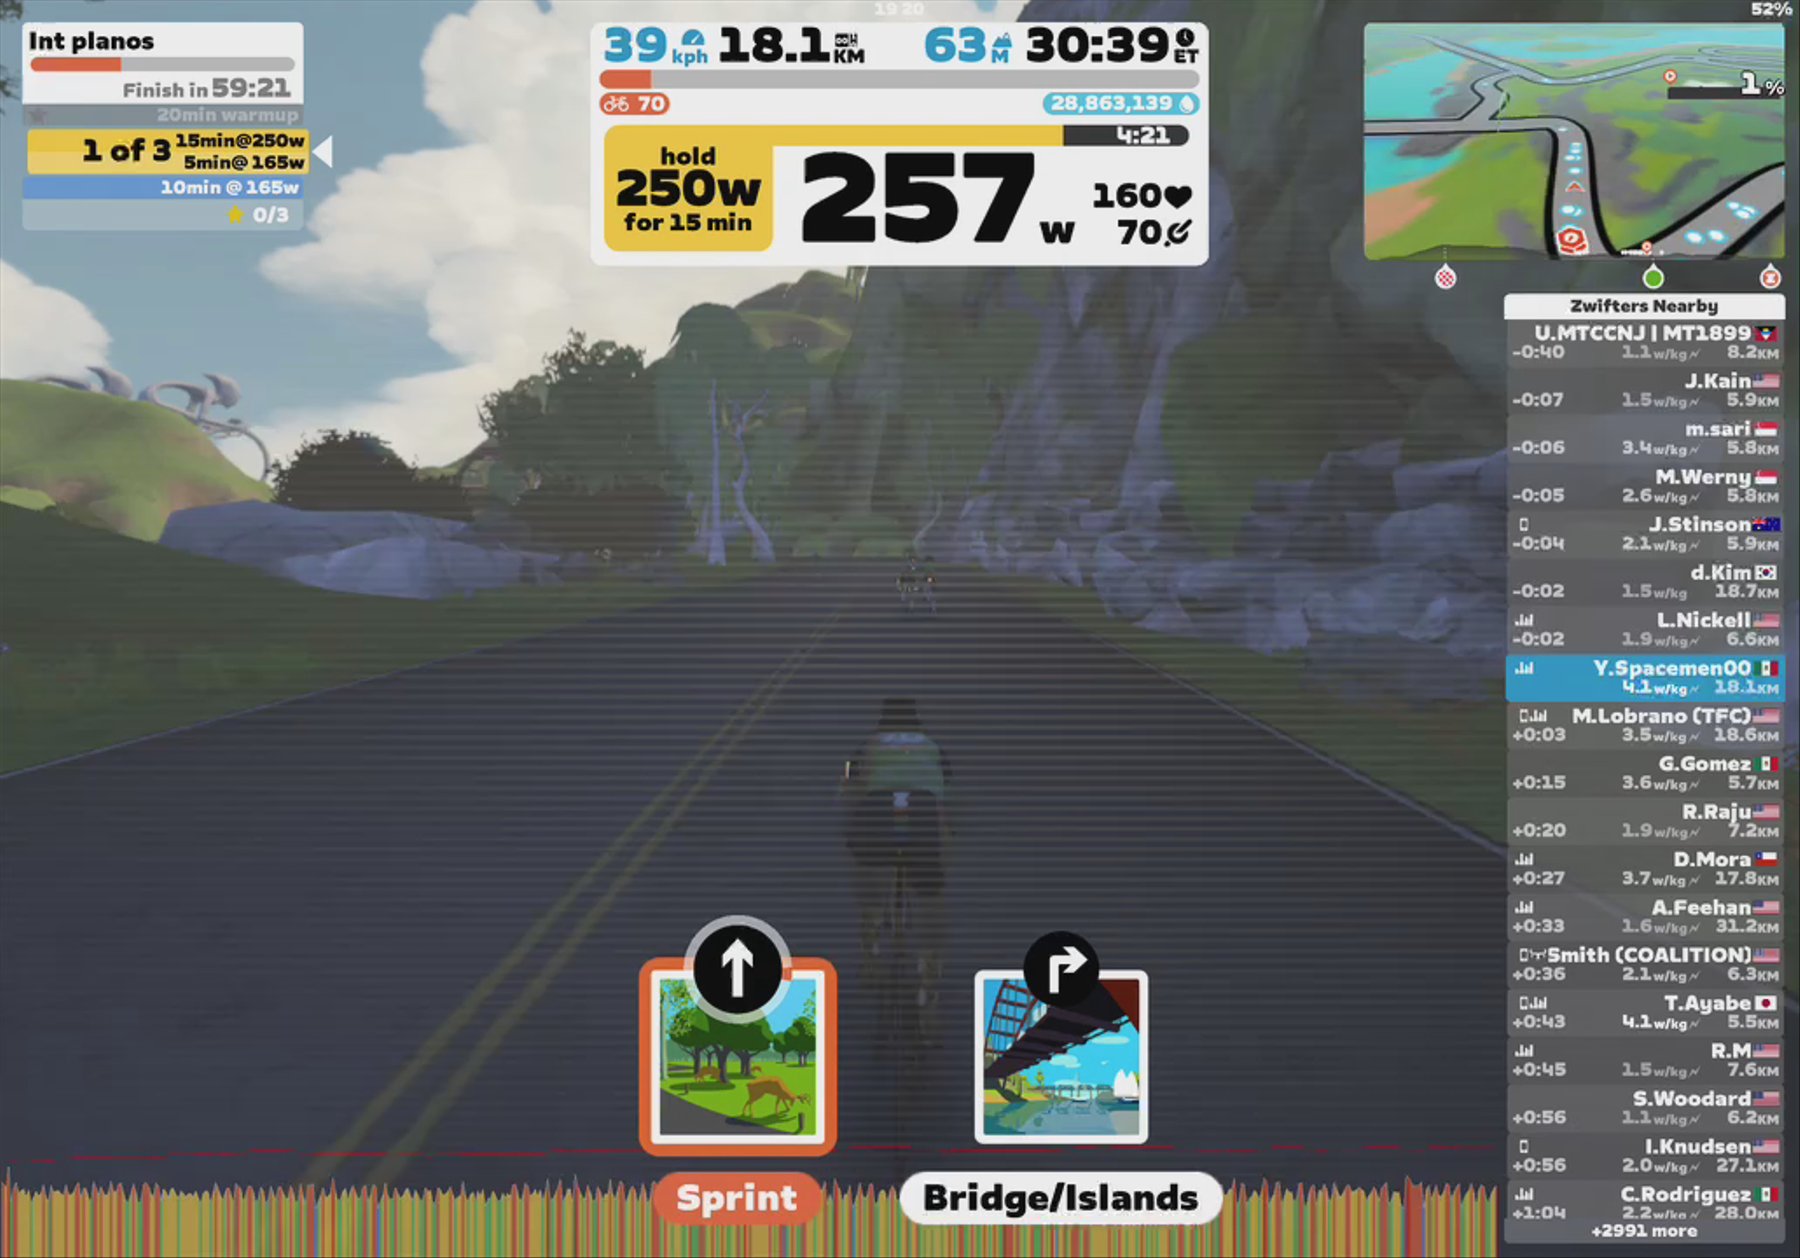 Zwift - Int planos in Watopia